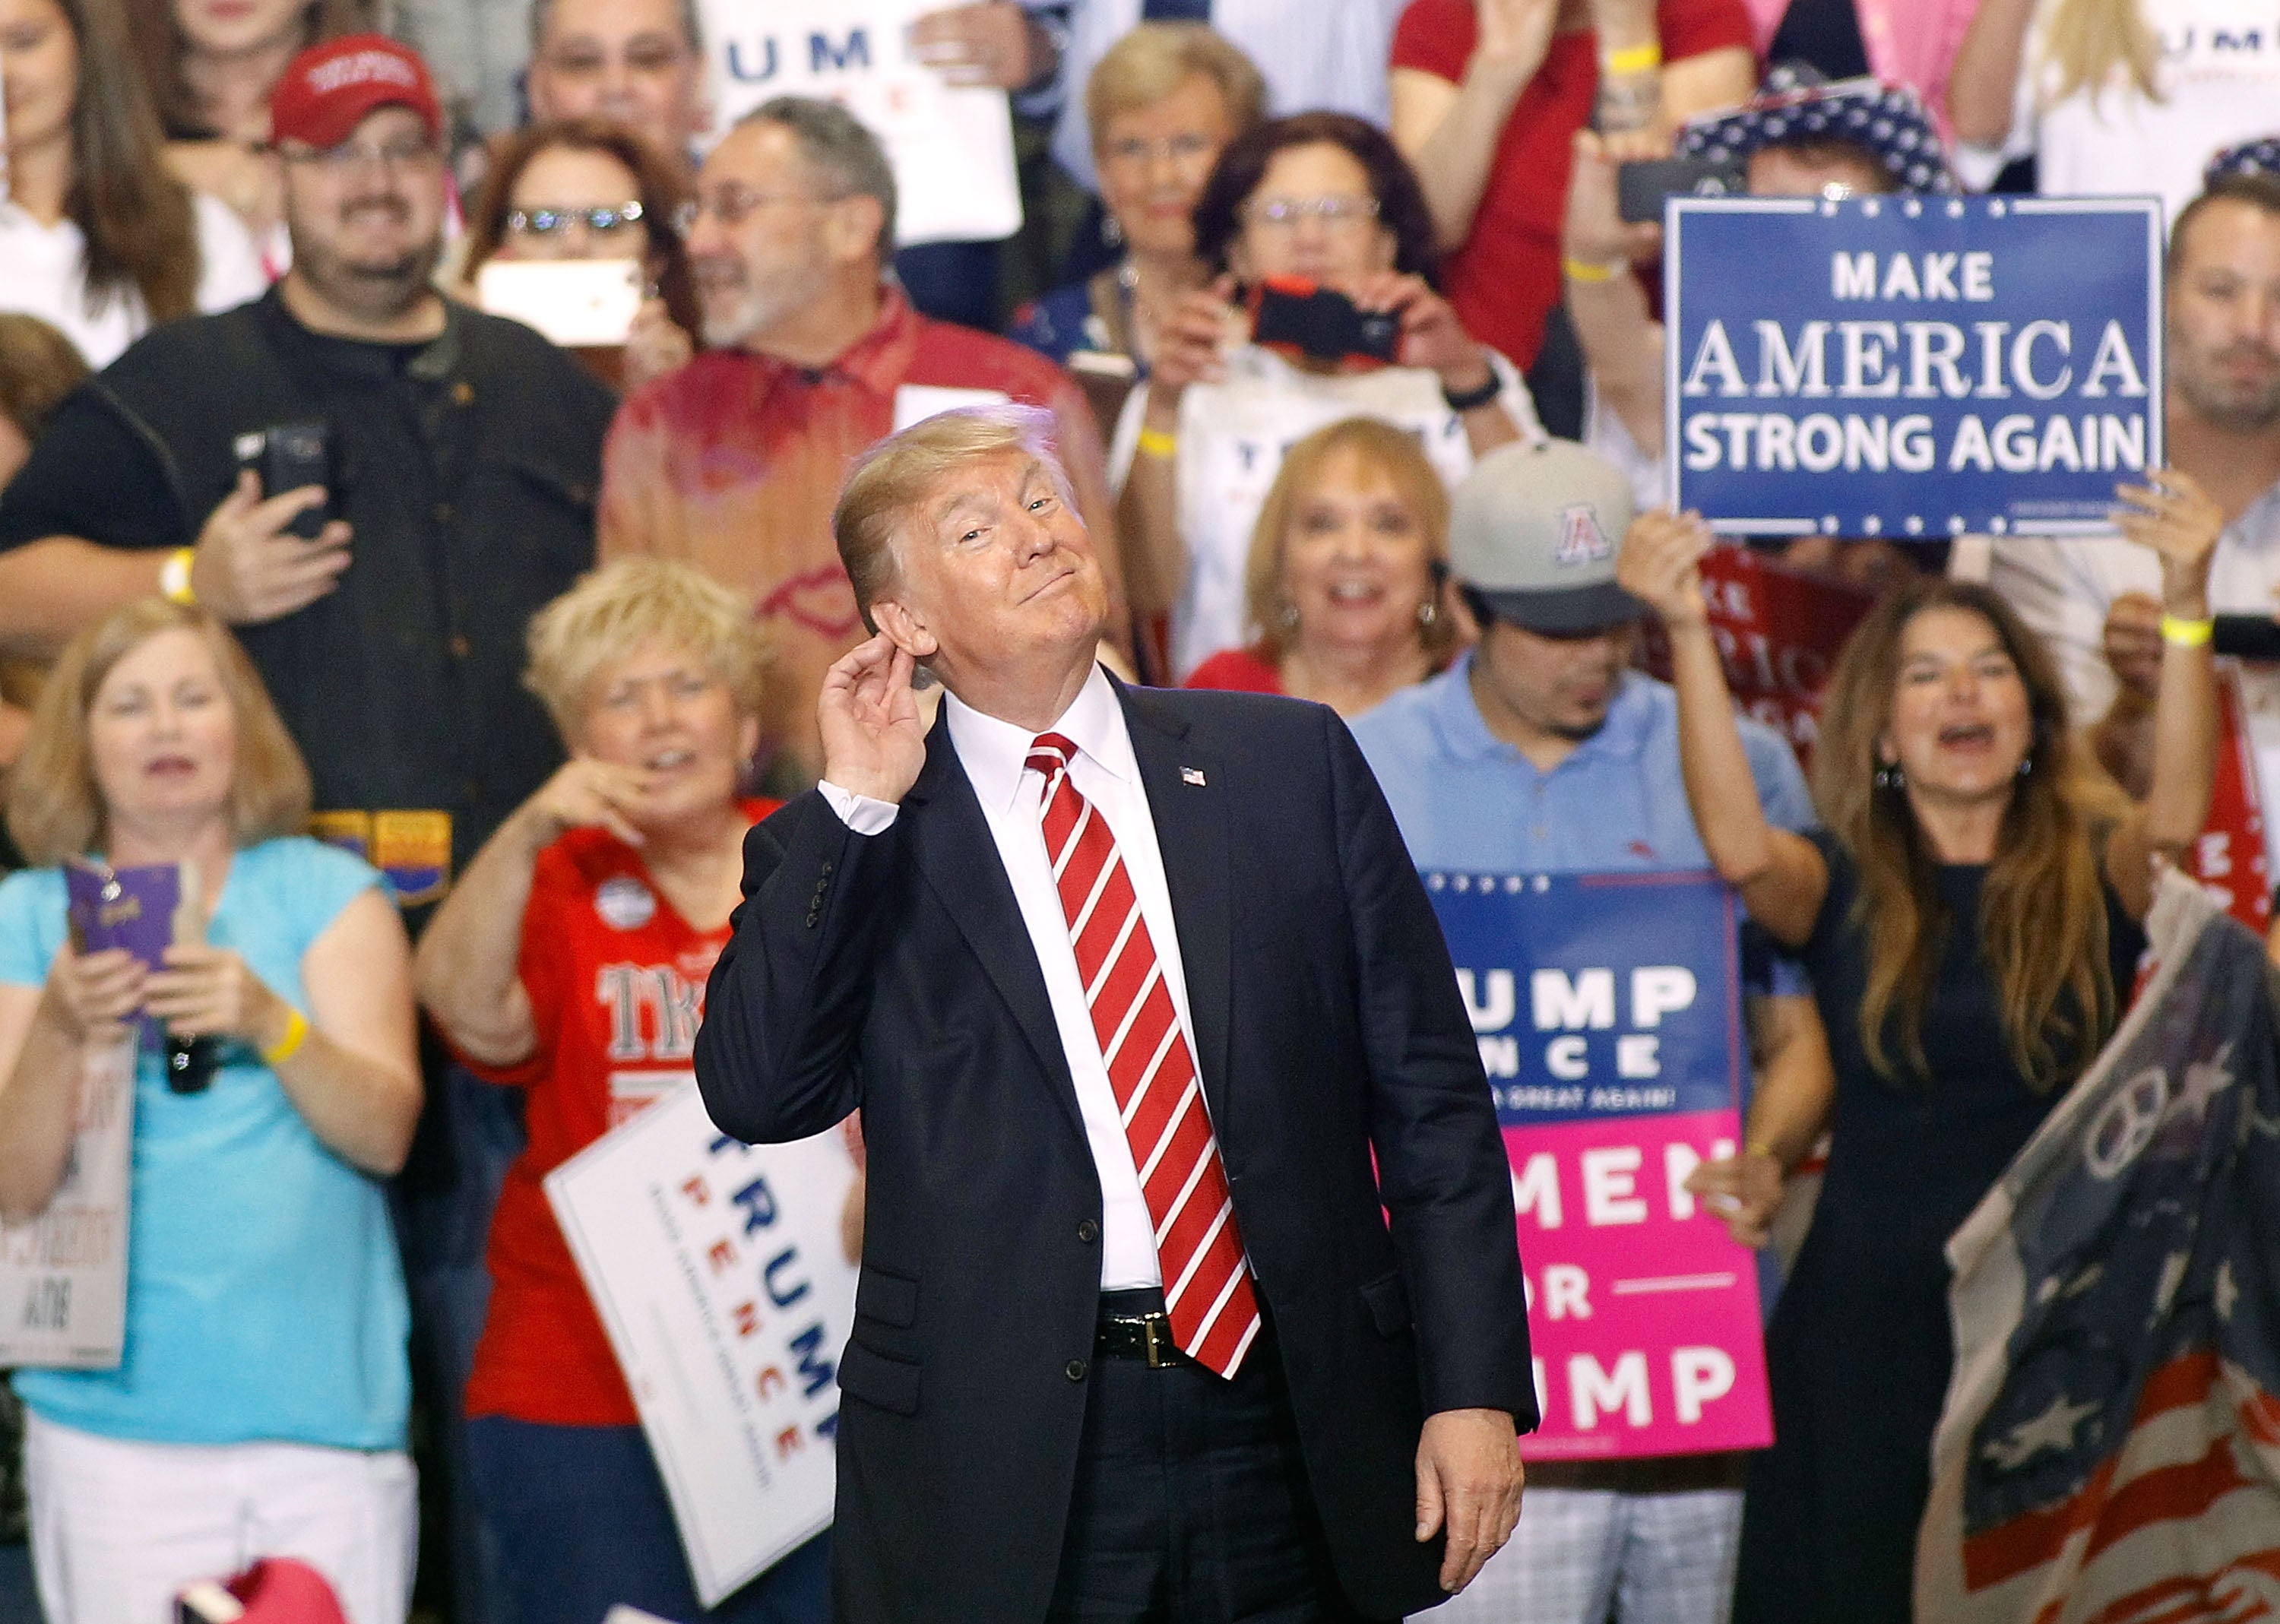 Who Didn't Trump Attack In That Outrageous, Delusional Campaign Rally In Arizona?
